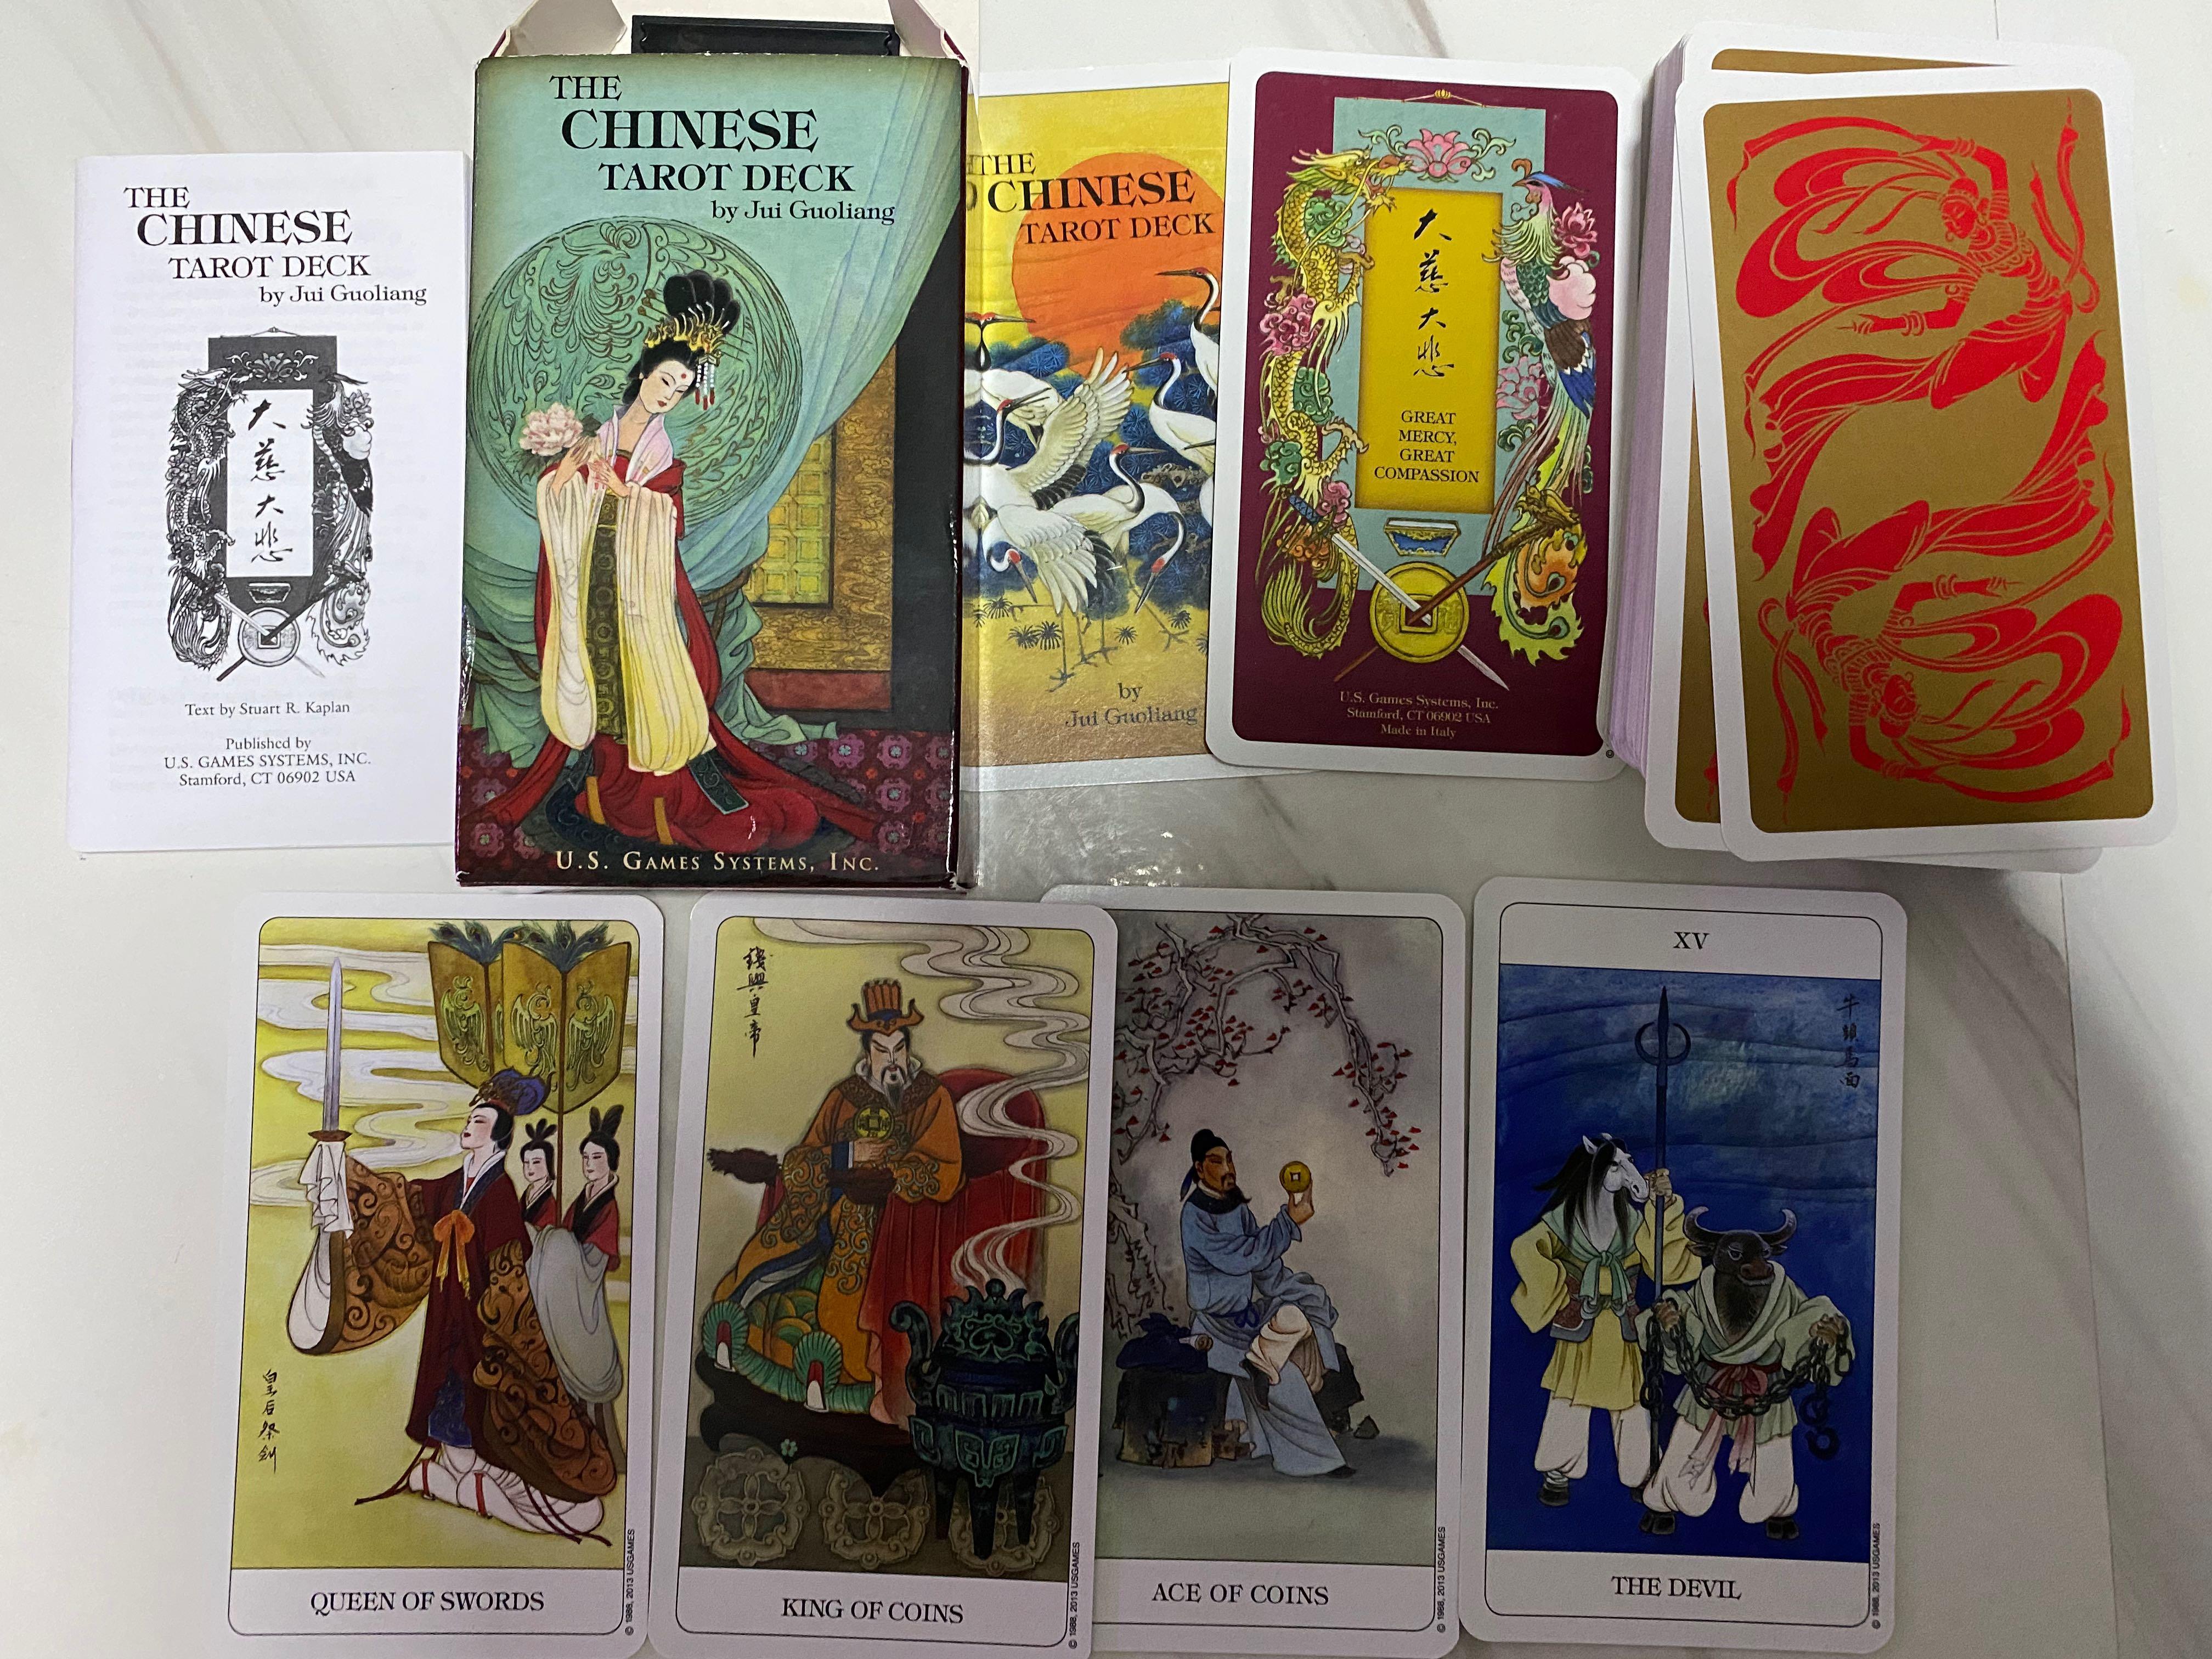 U.S. Games Systems, Inc. > Tarot & Inspiration > The Chinese Tarot” style=”width:100%”></a><figcaption class=